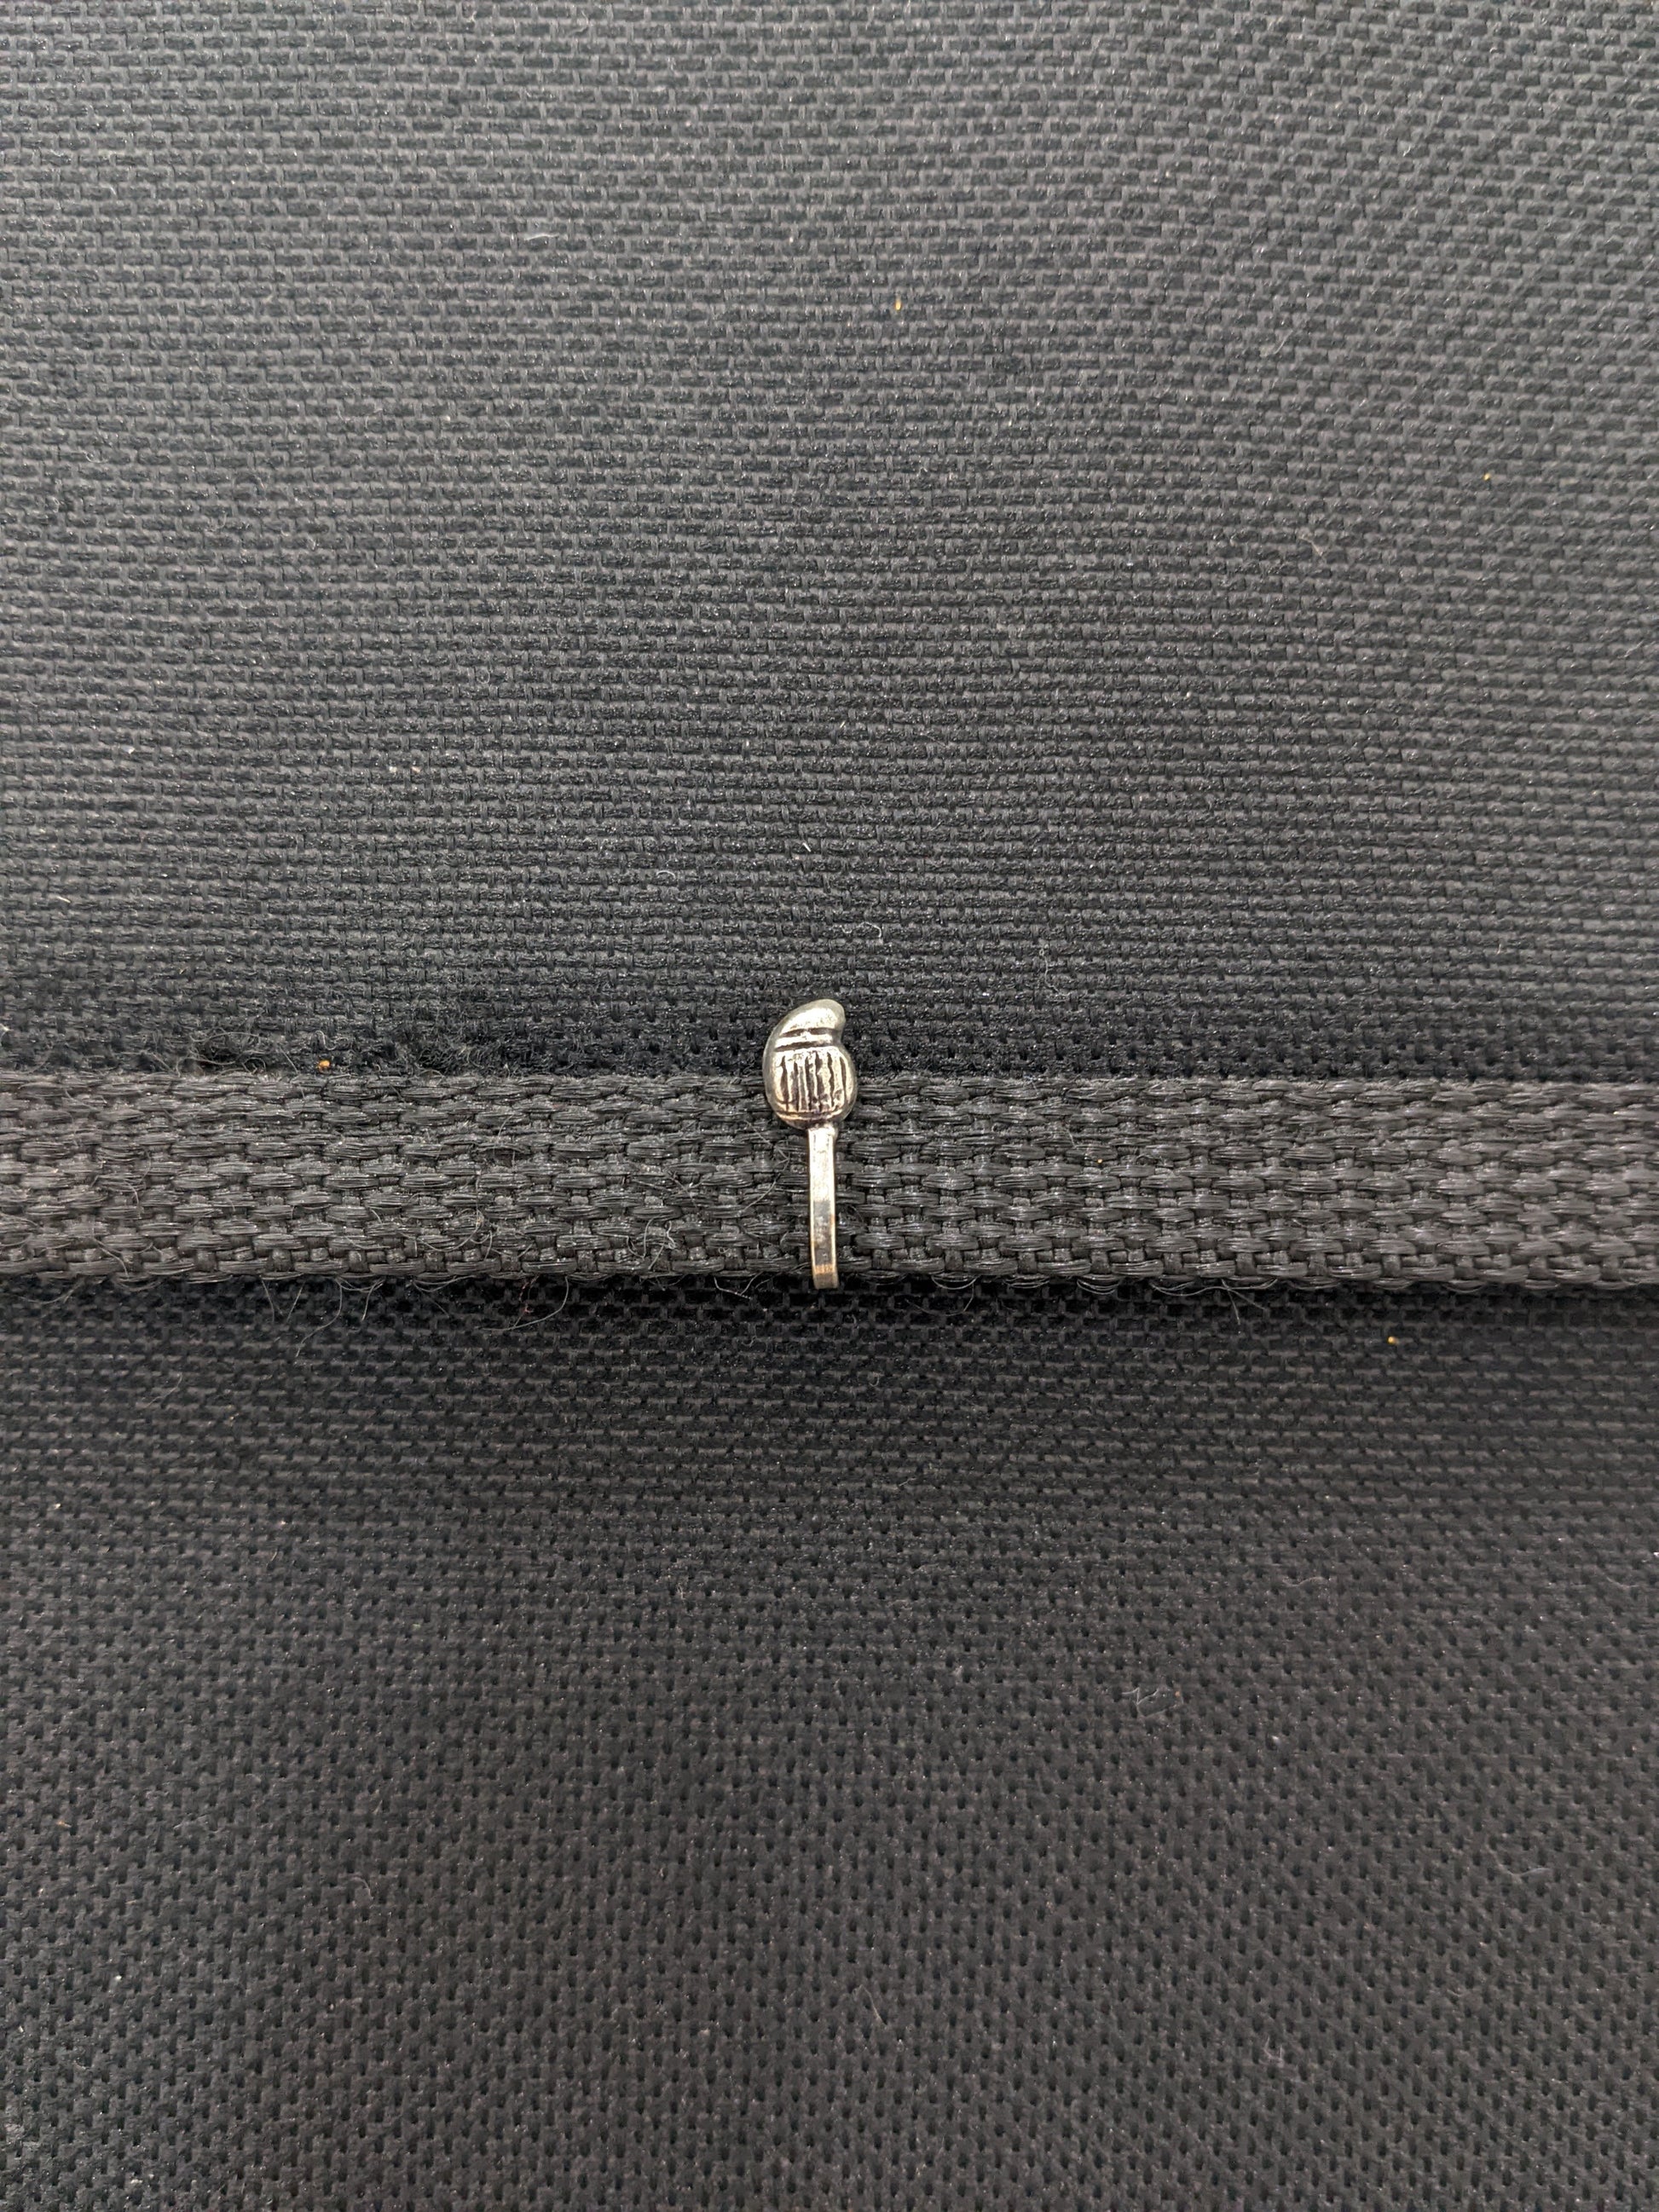 Oxidized silver clip on Nose Pin - Simpliful